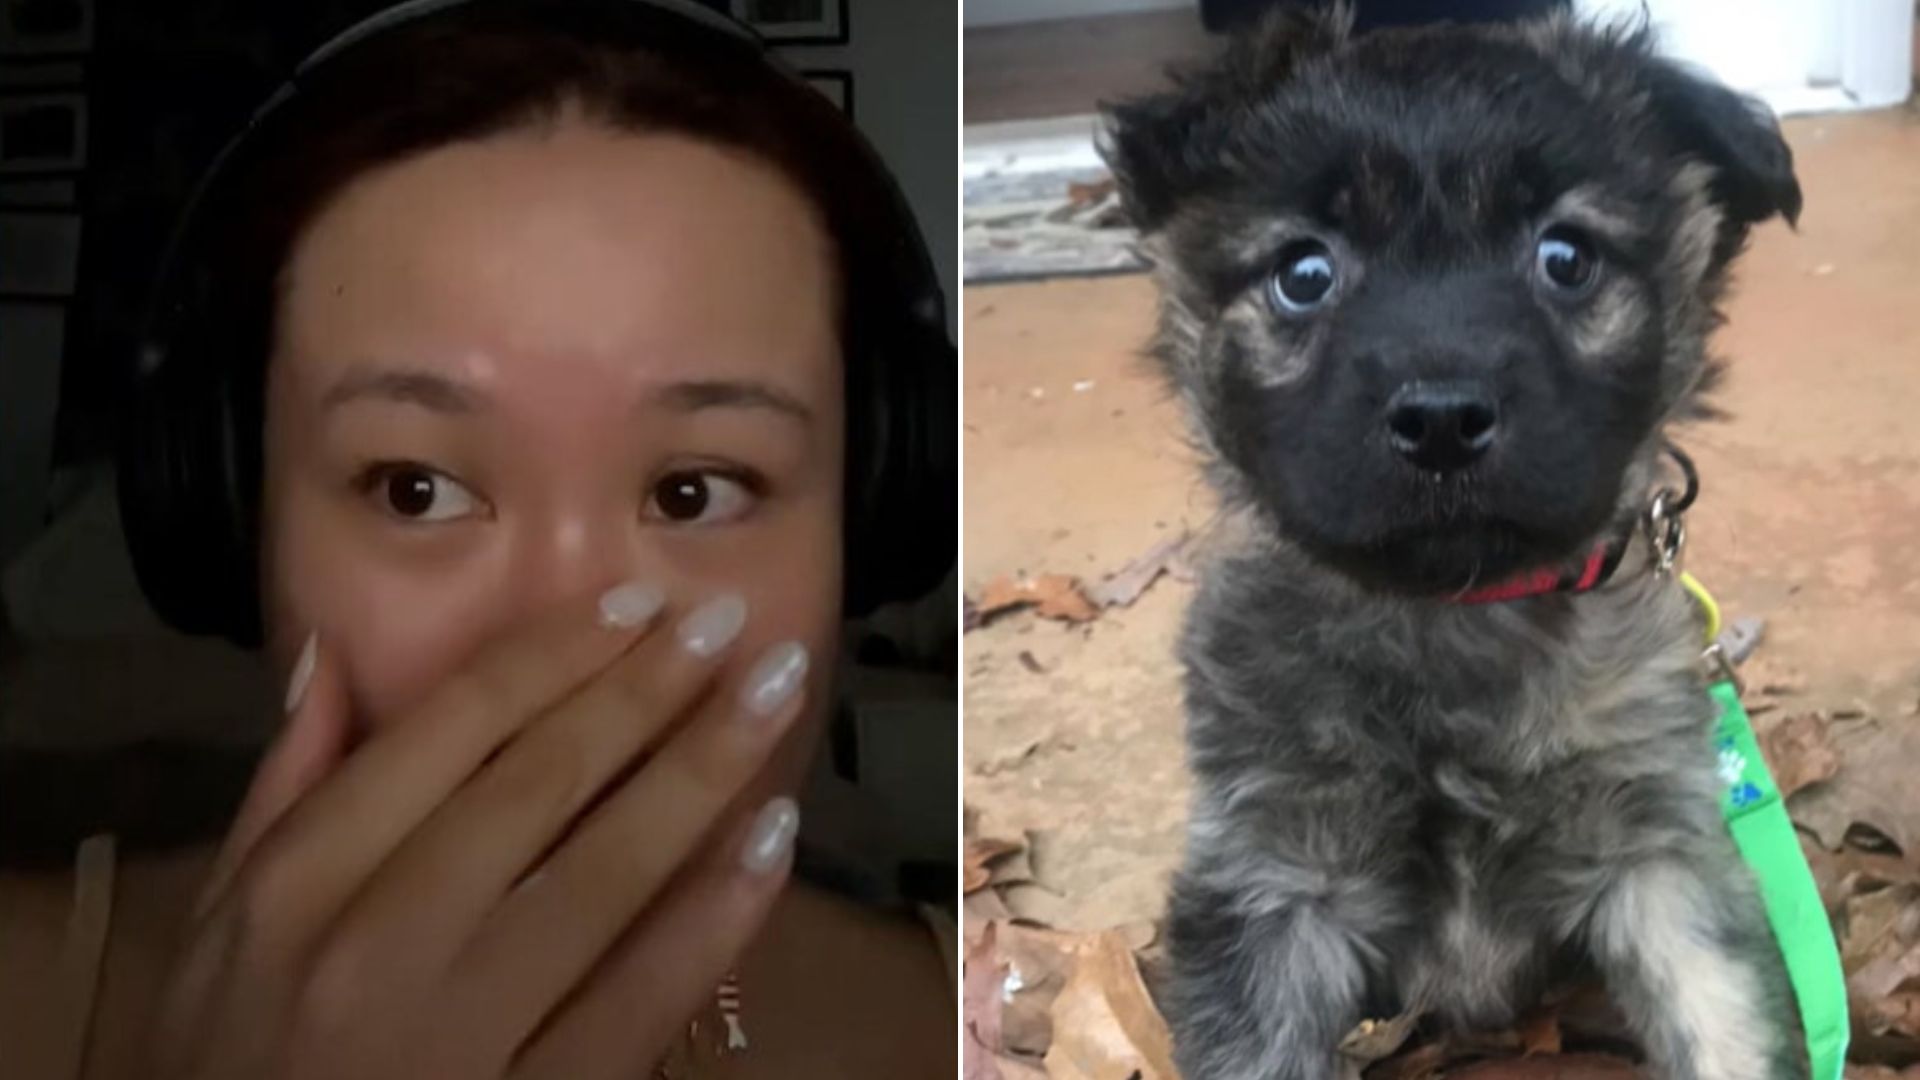 Woman DNA Tests Her Dog, Only To Discover A Shocking Secret About His Family